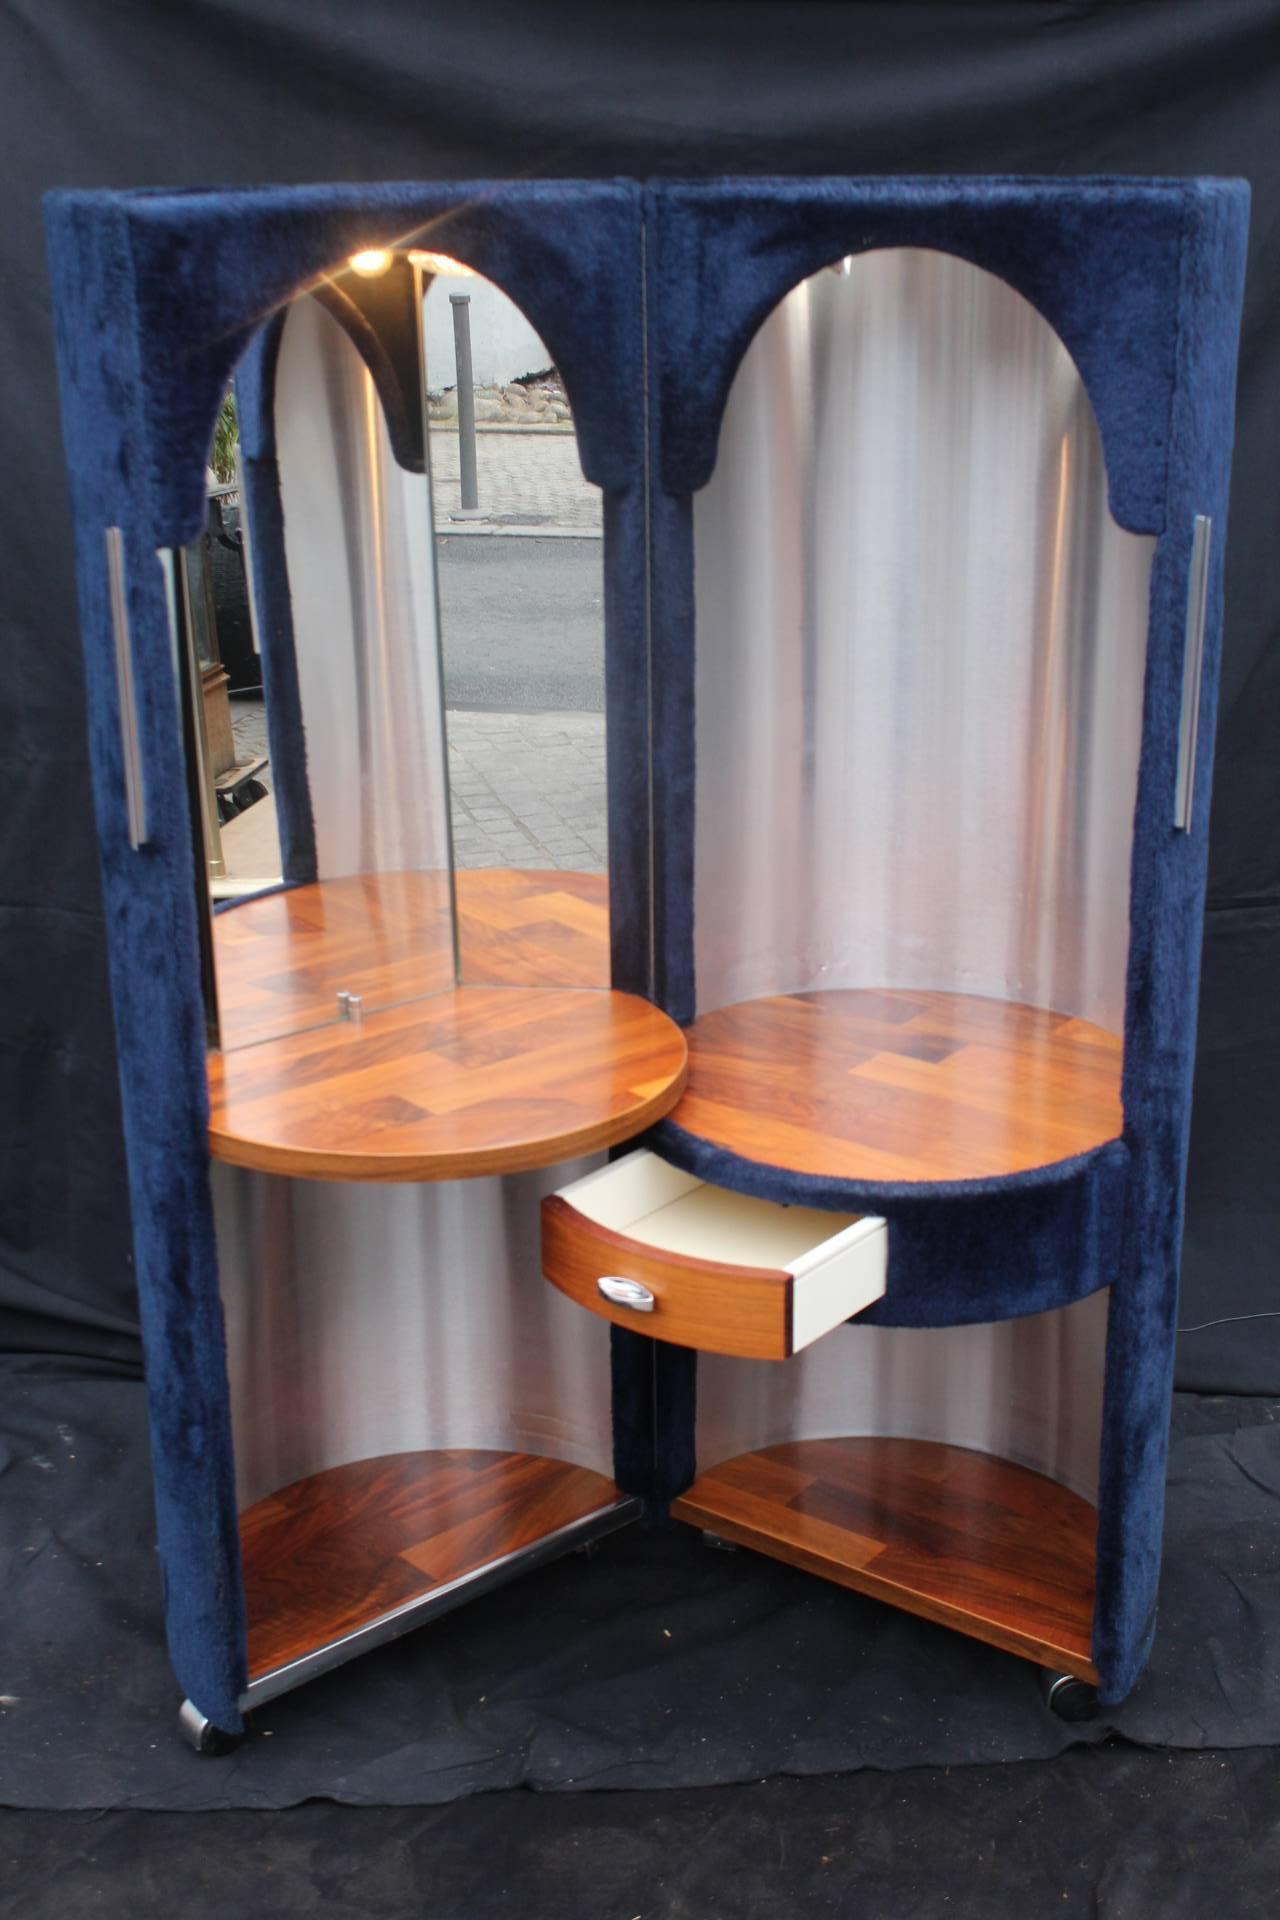 Vanity
Attributed to Poltrona Frau Edition
Pop Design style
1970's

This Pop Design vanity shows a structure of cylindrical shape covered with a synthetic fur. The opening discovers an aluminium inside with a drawer in belt and an integrated